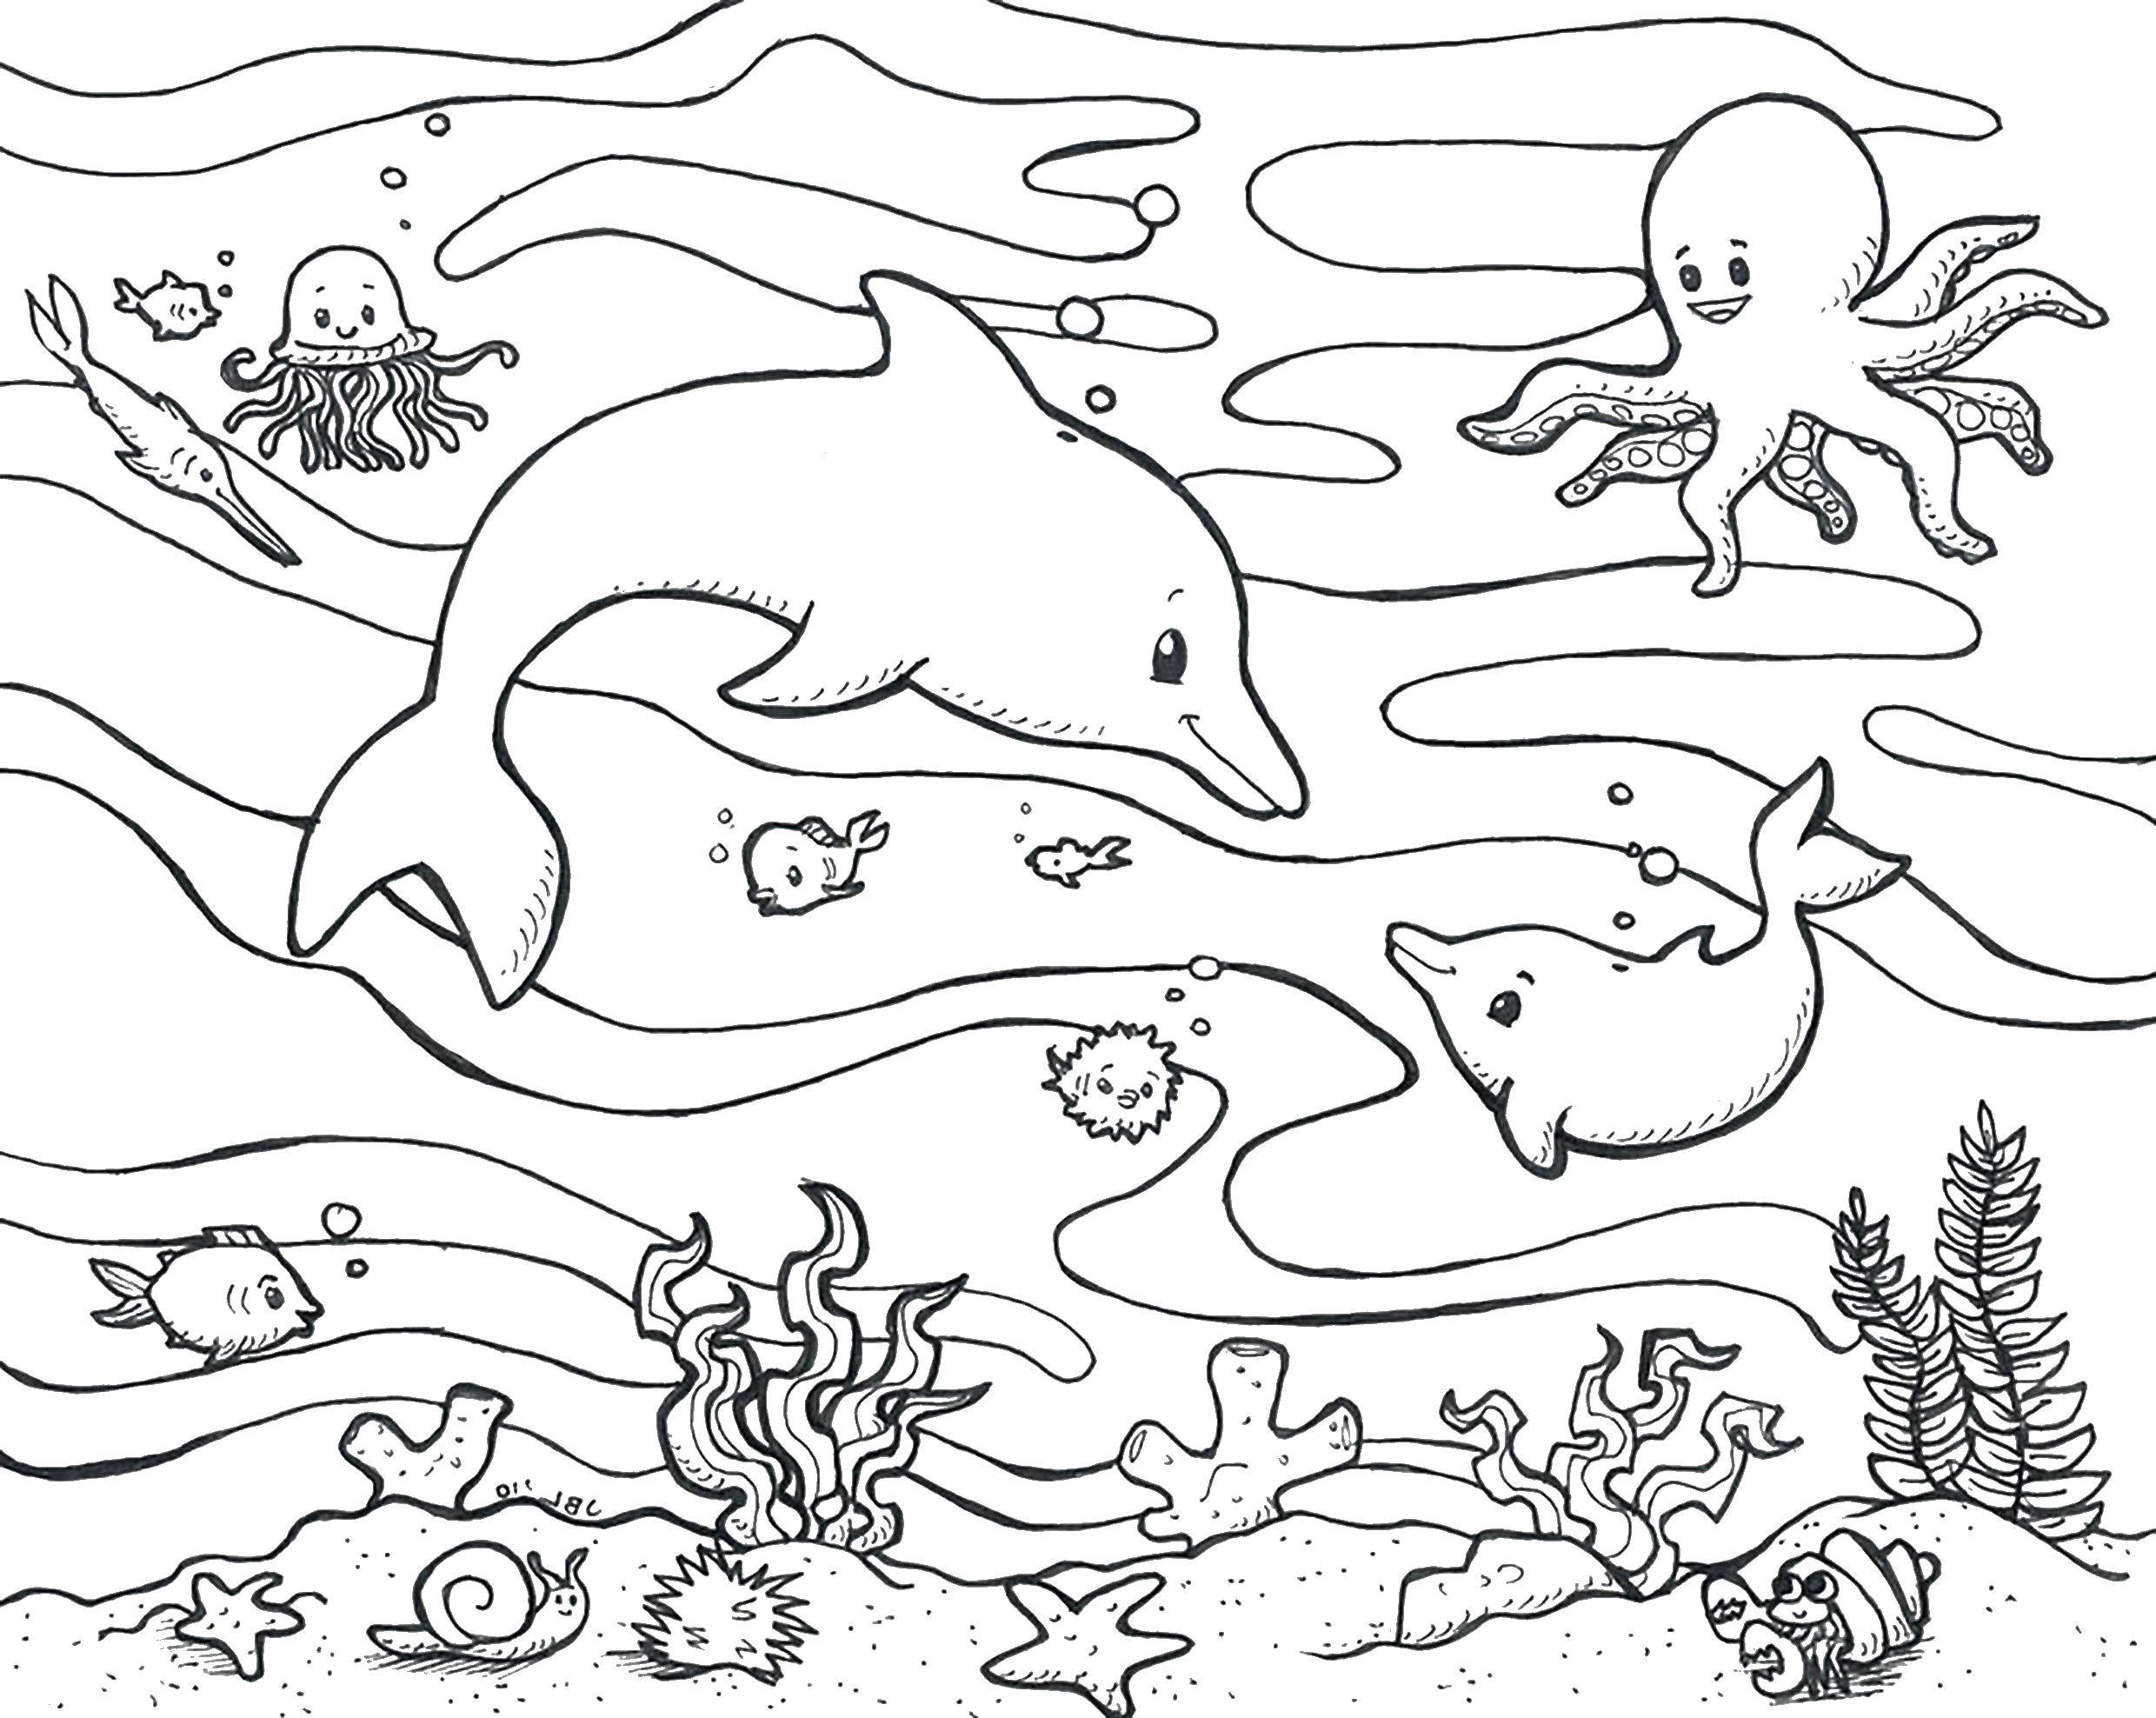 Coloring Dolphins and octopus. Category marine animals. Tags:  octopus, dolphins.